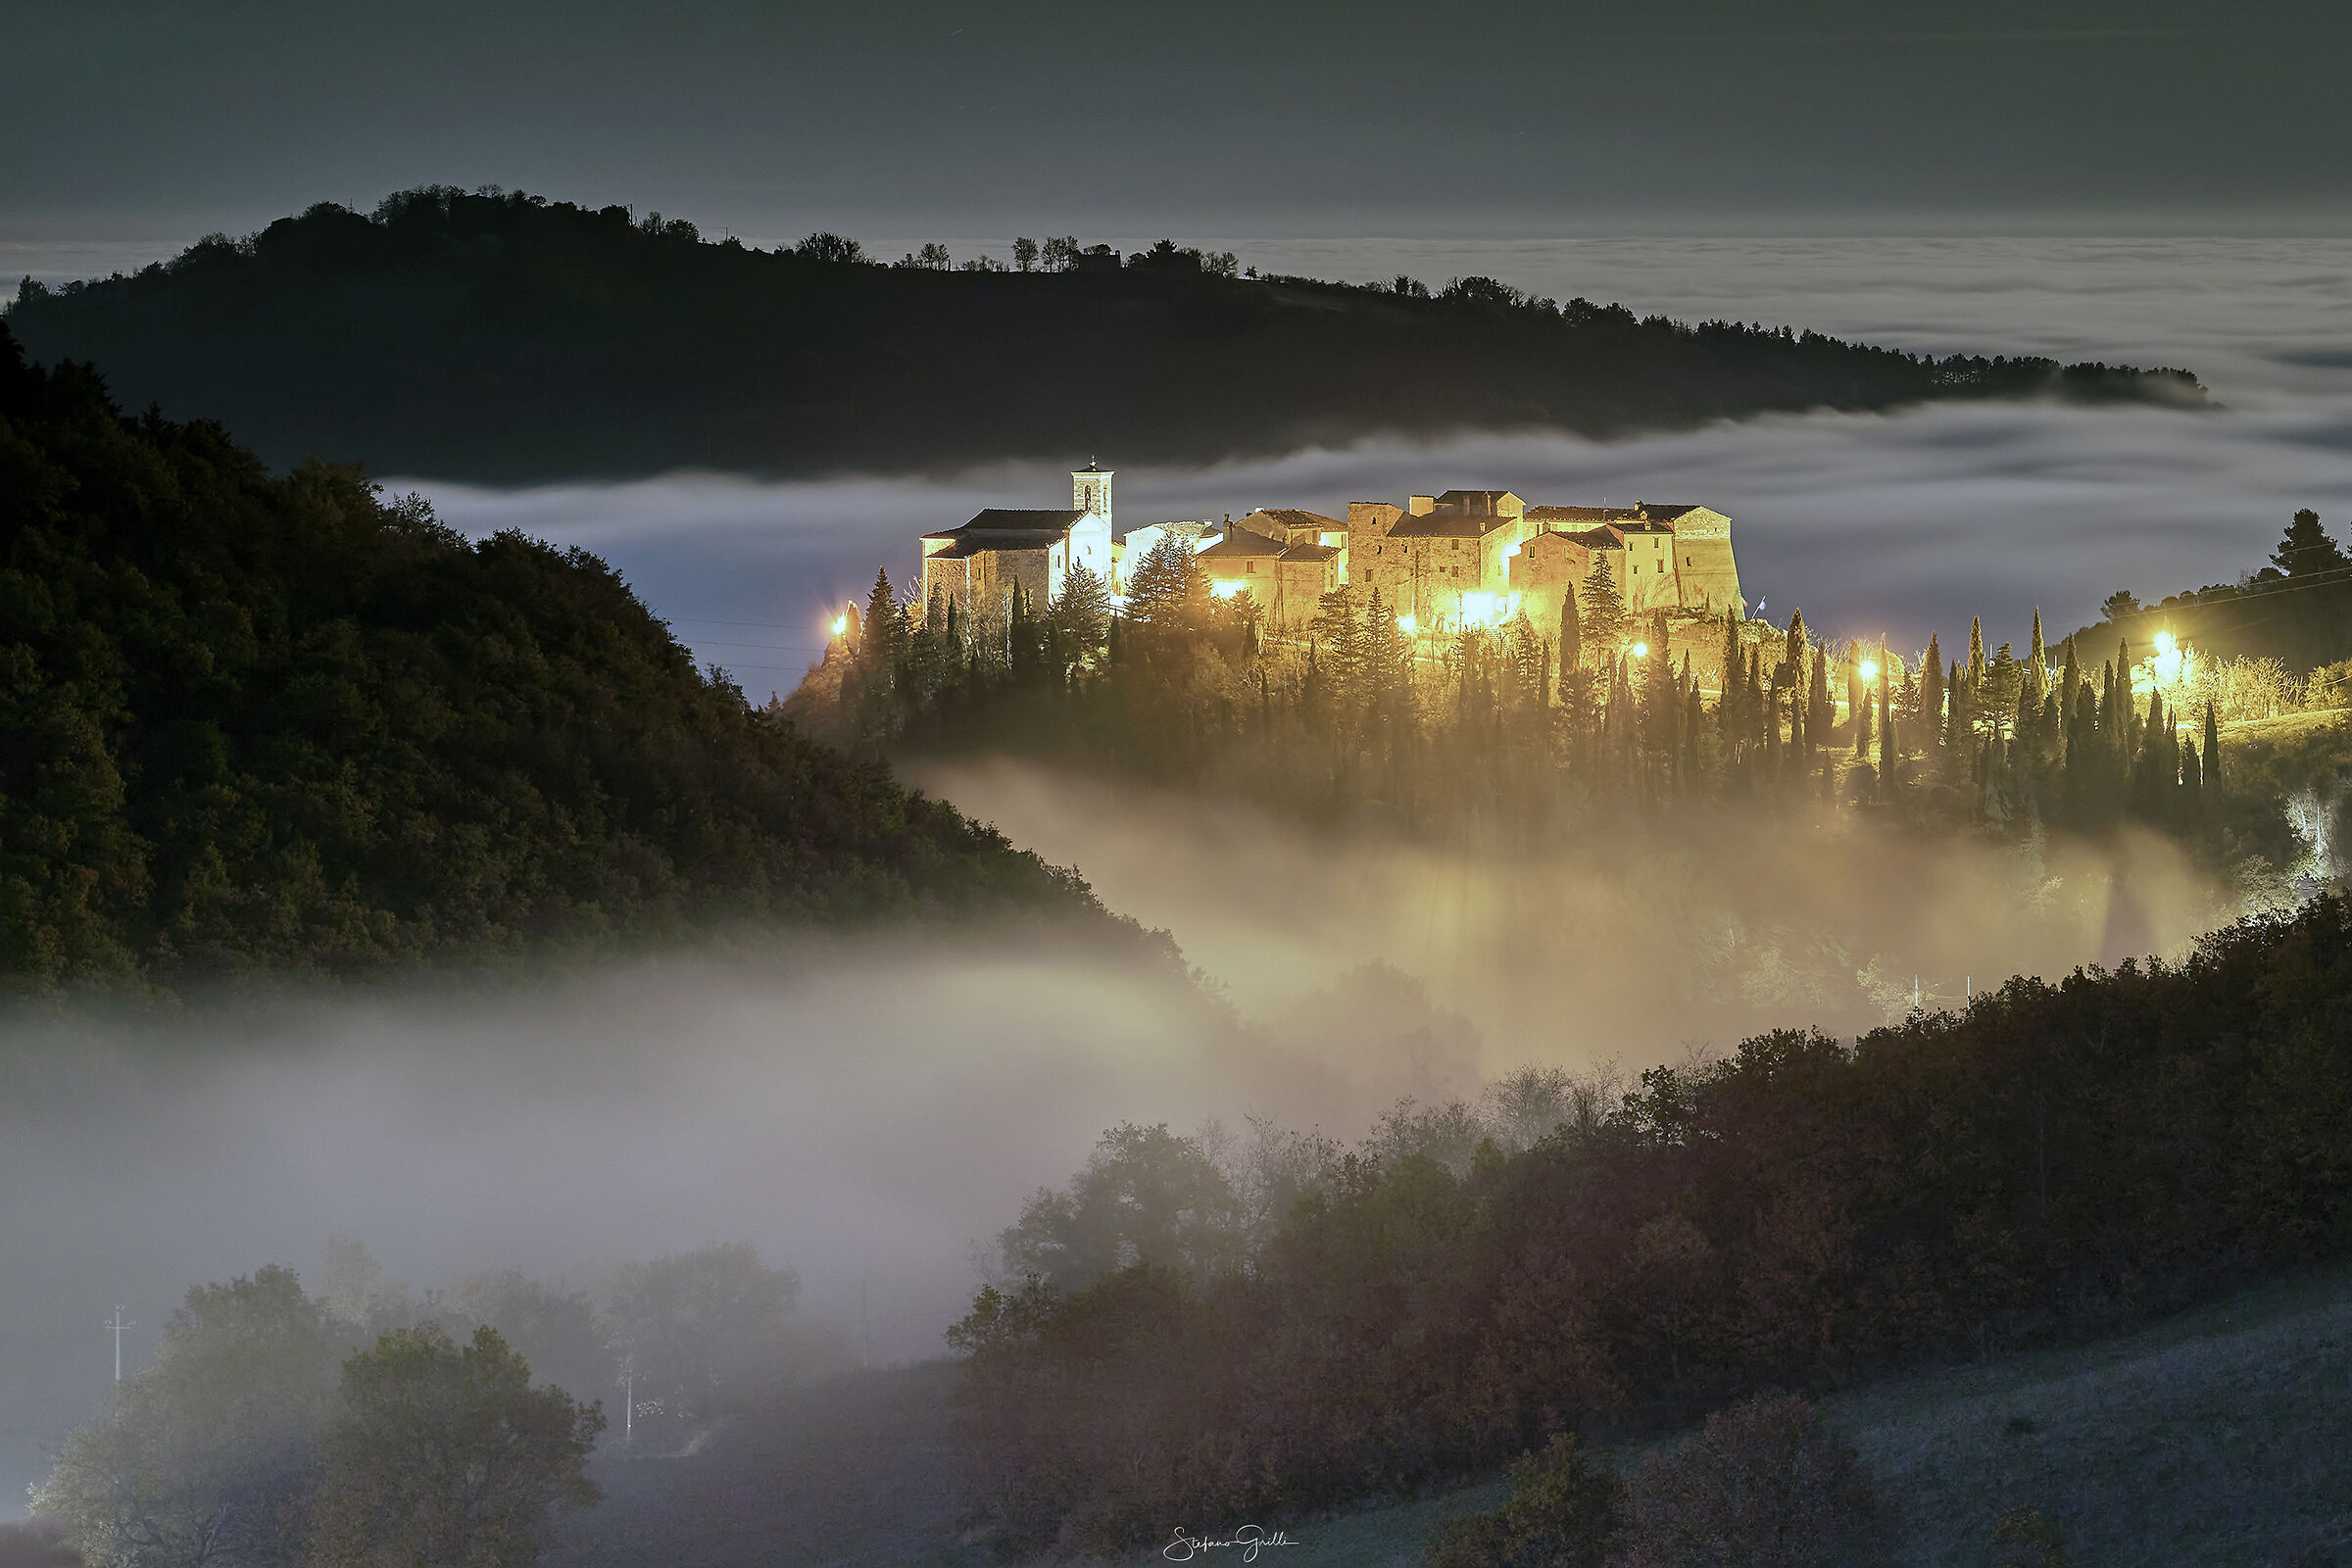 Castle of Precicchie (An) shrouded in fog...